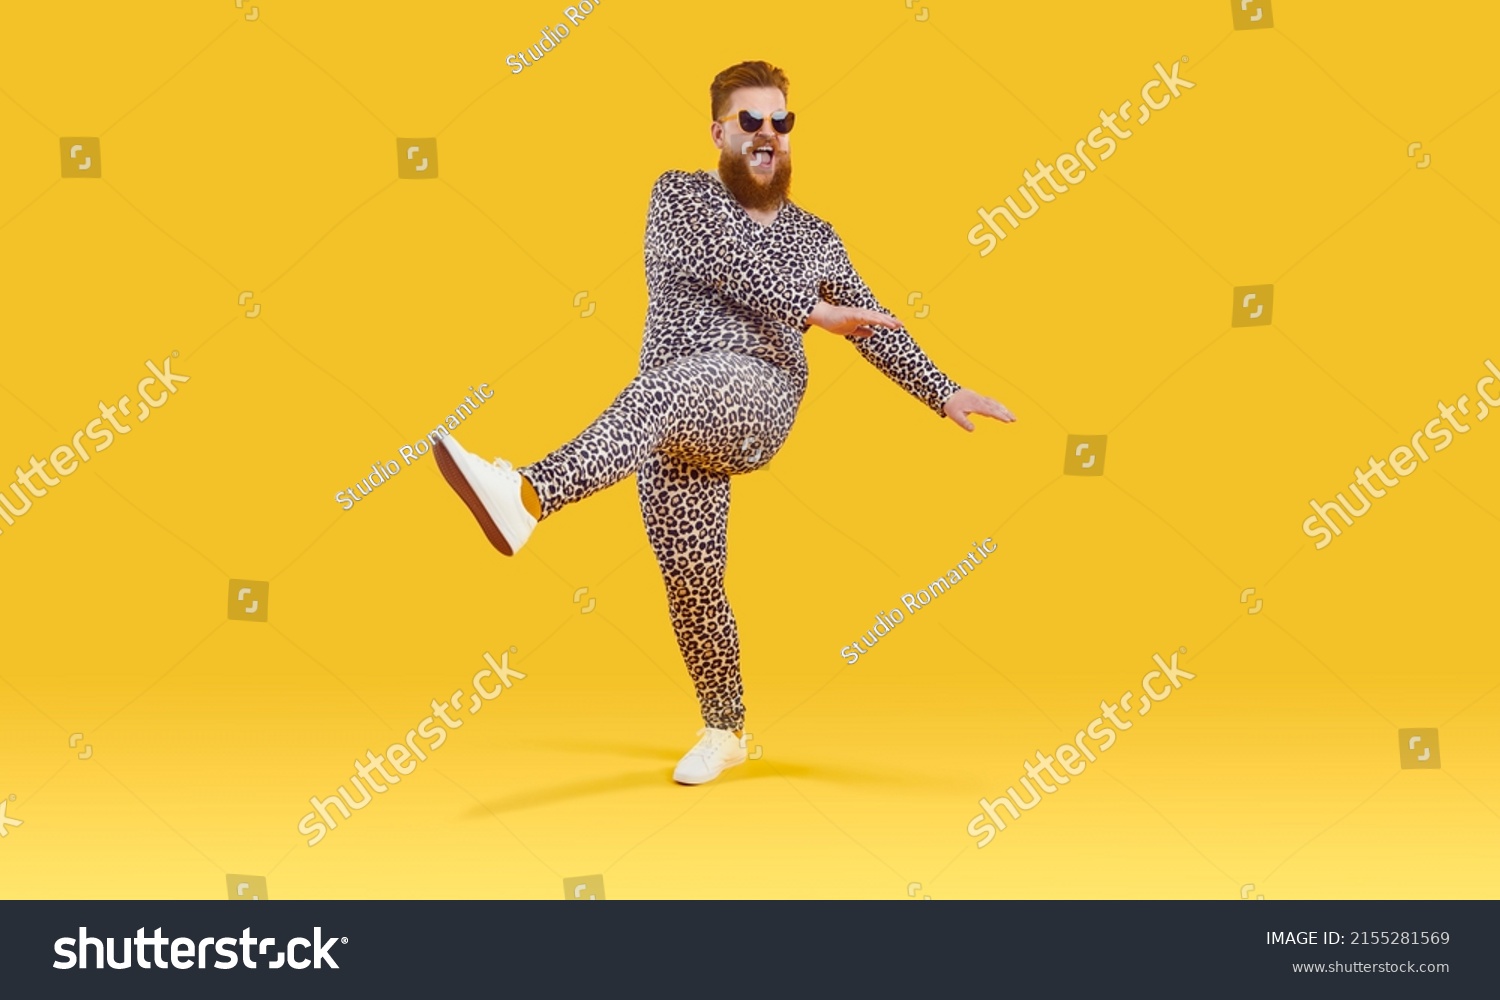 Plus size guy in funny pyjamas having fun in modern studio. Happy carefree fat man wearing comfortable leopard PJs and sunglasses dancing isolated on yellow background. Crazy party and fashion concept #2155281569